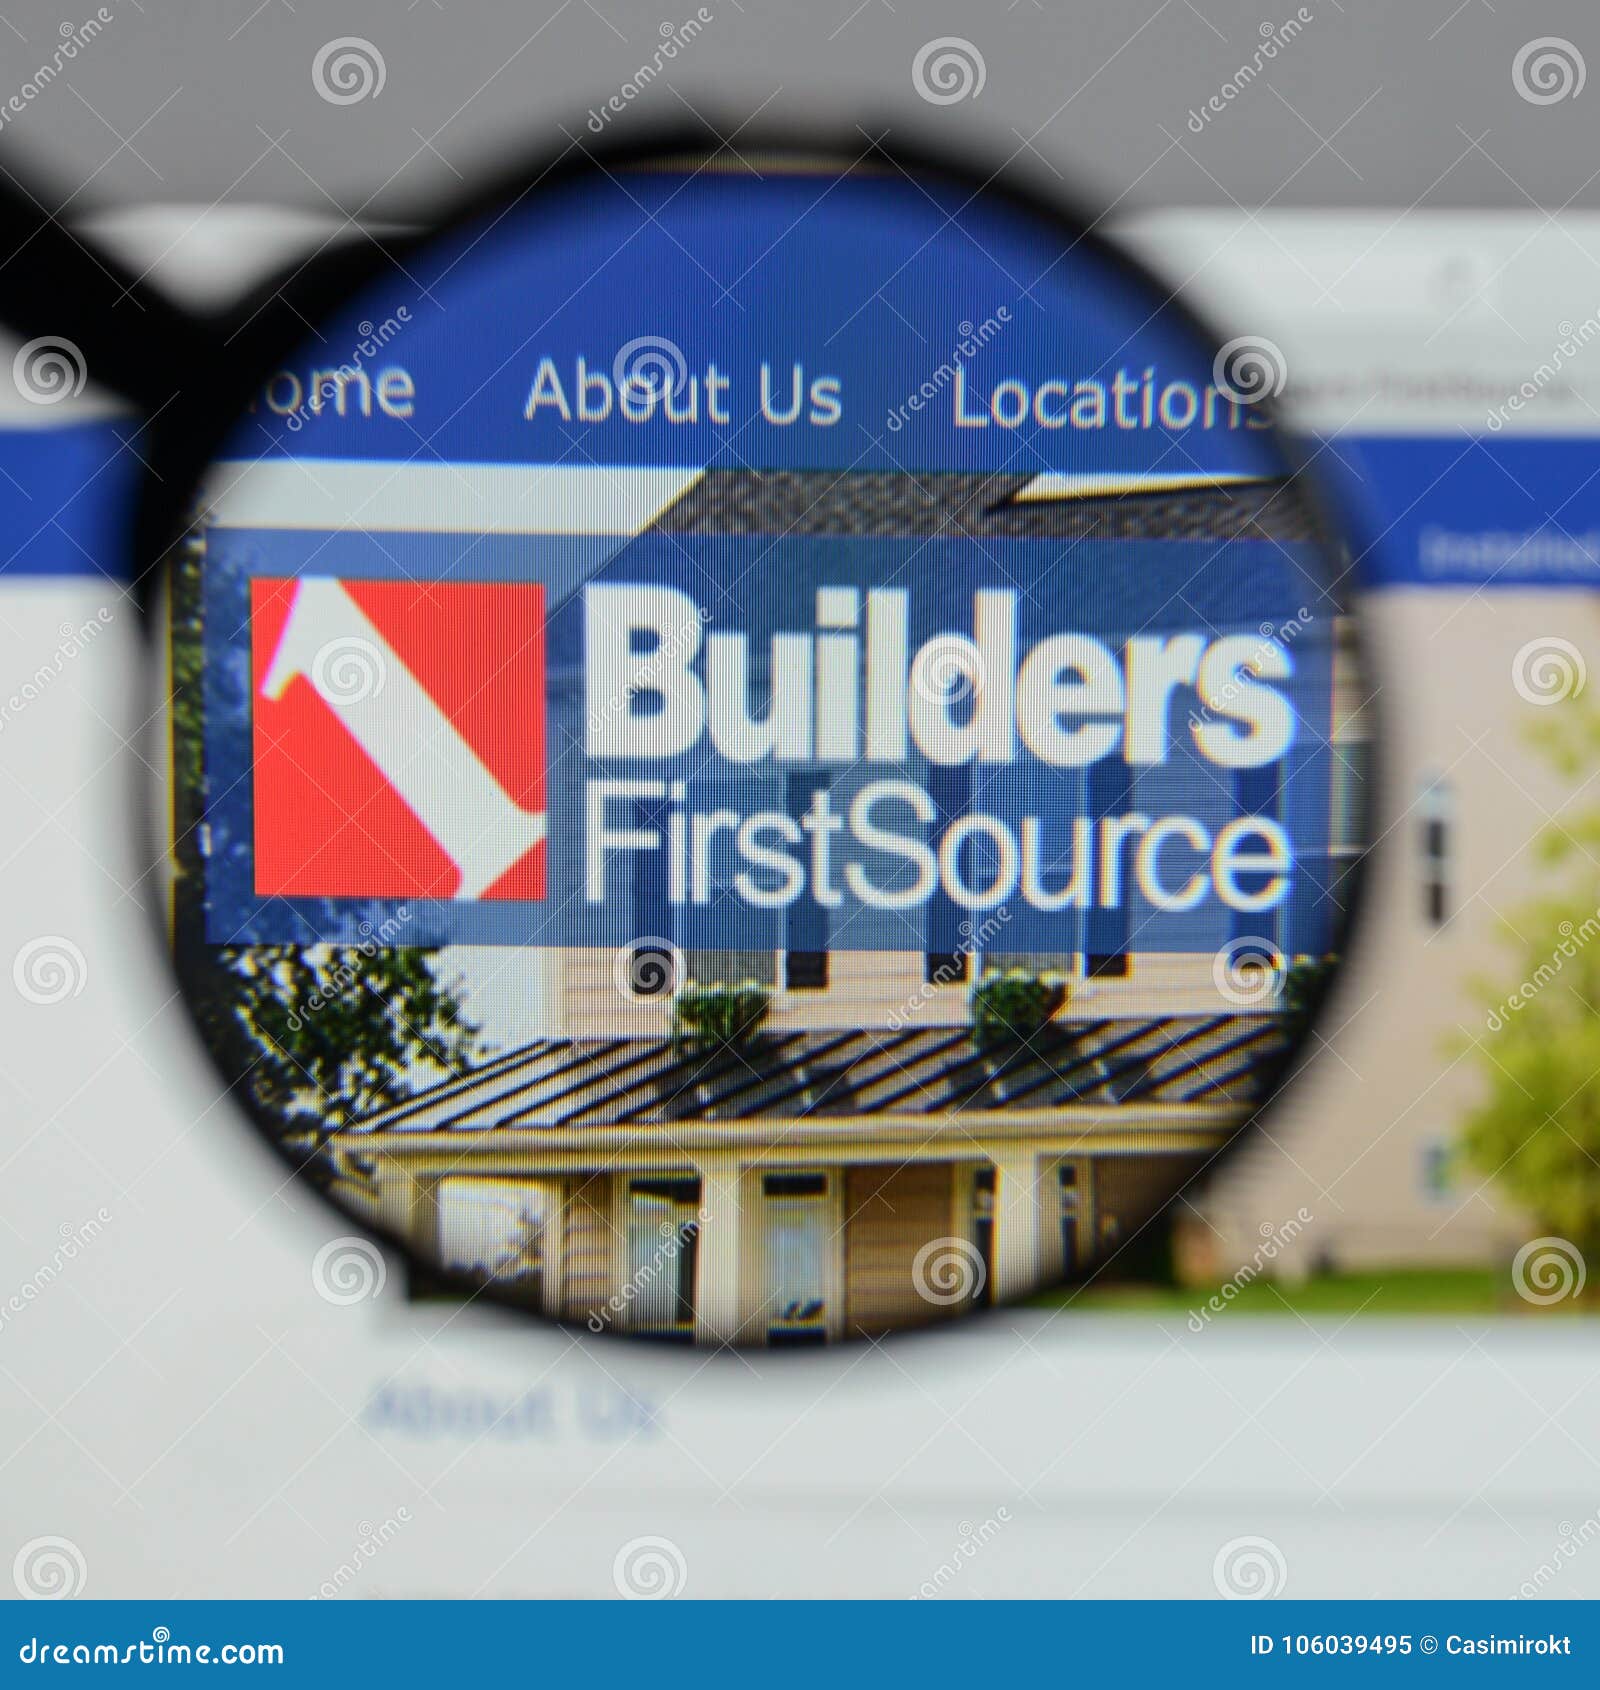 builders first source